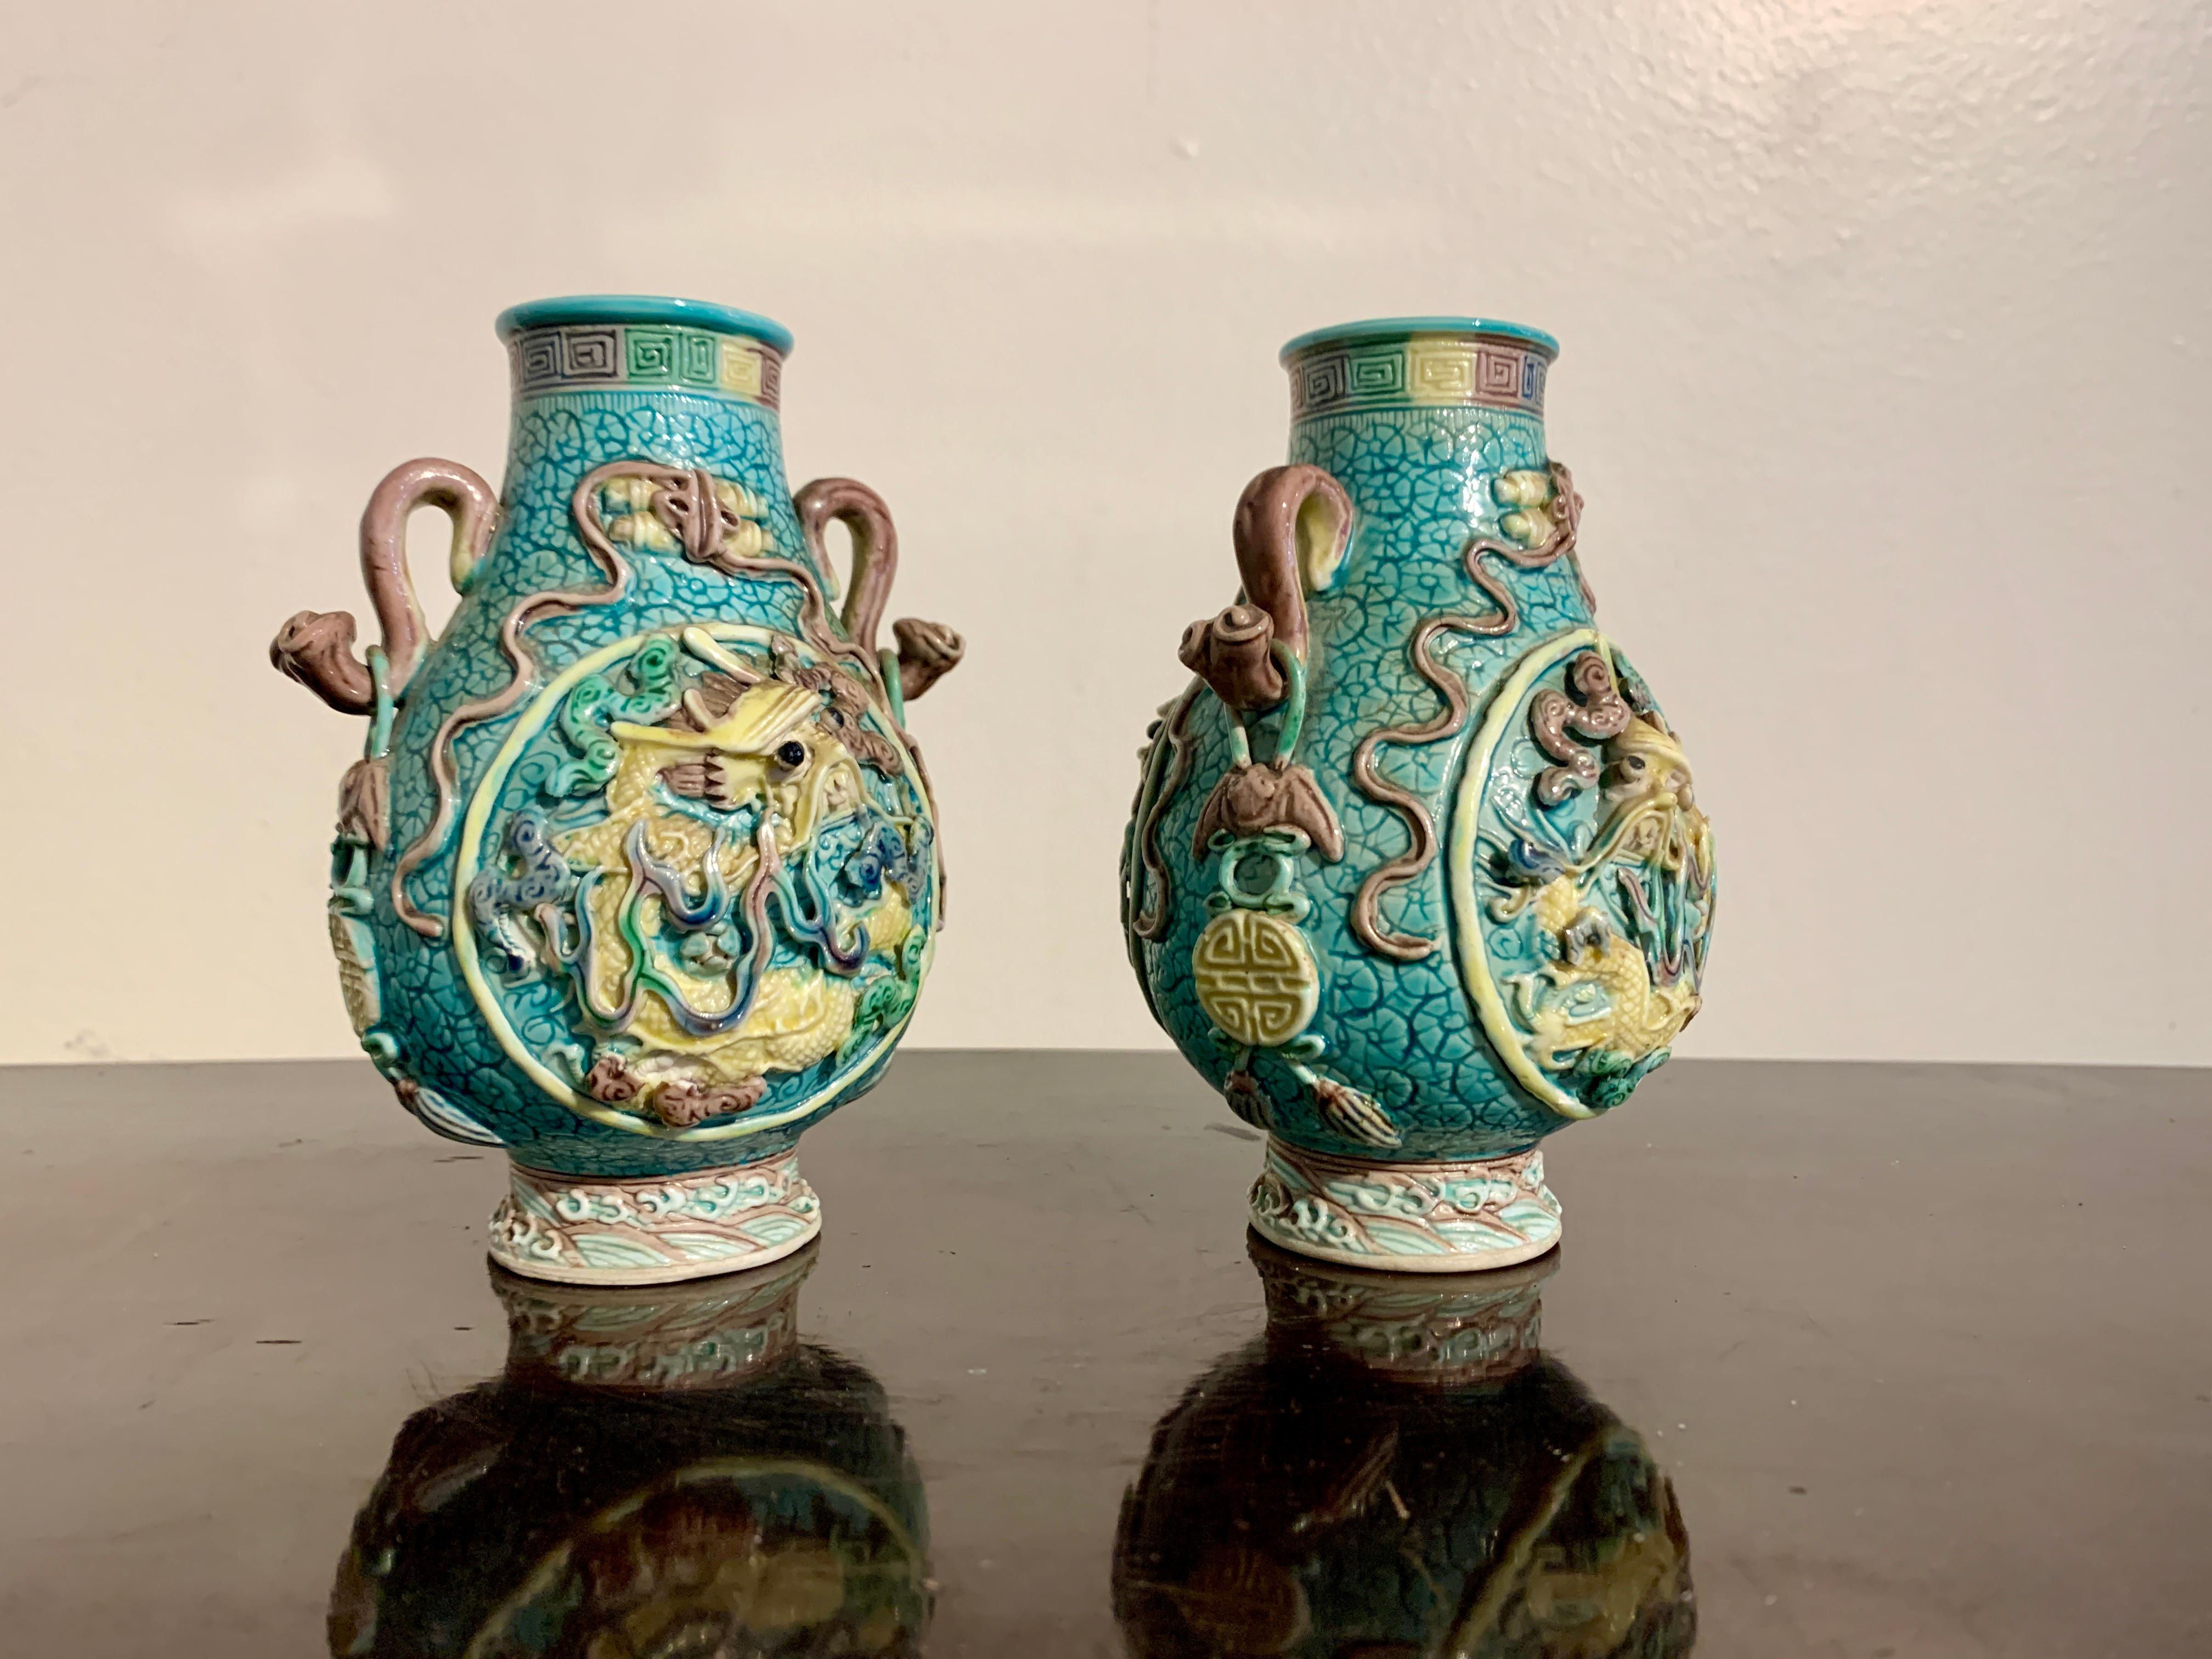 A fabulous pair of small Chinese molded and glazed biscuit ware porcelain dragon vases with loose eyes and apocryphal Qianlong mark, Republic Period, circa 1920, China.

The small vases of traditional 